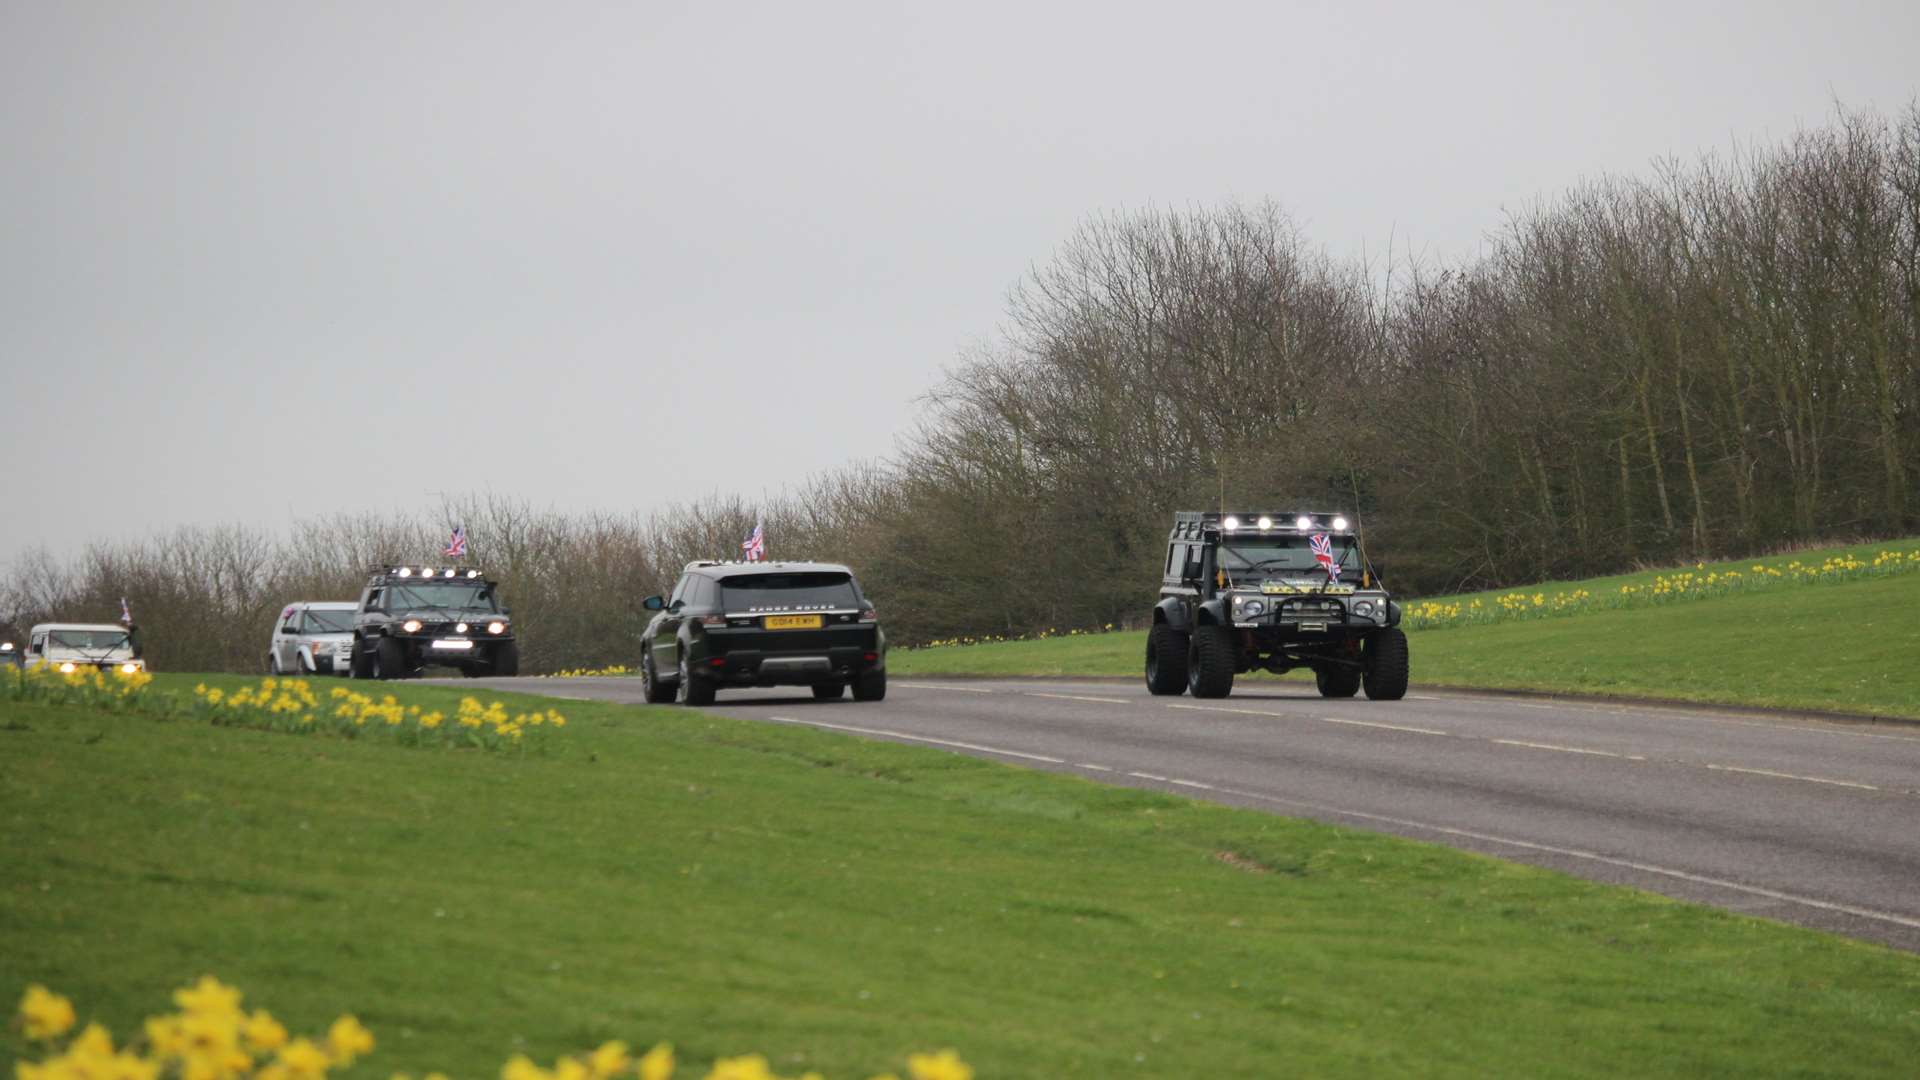 The start of the convoy approaching Eastchurch